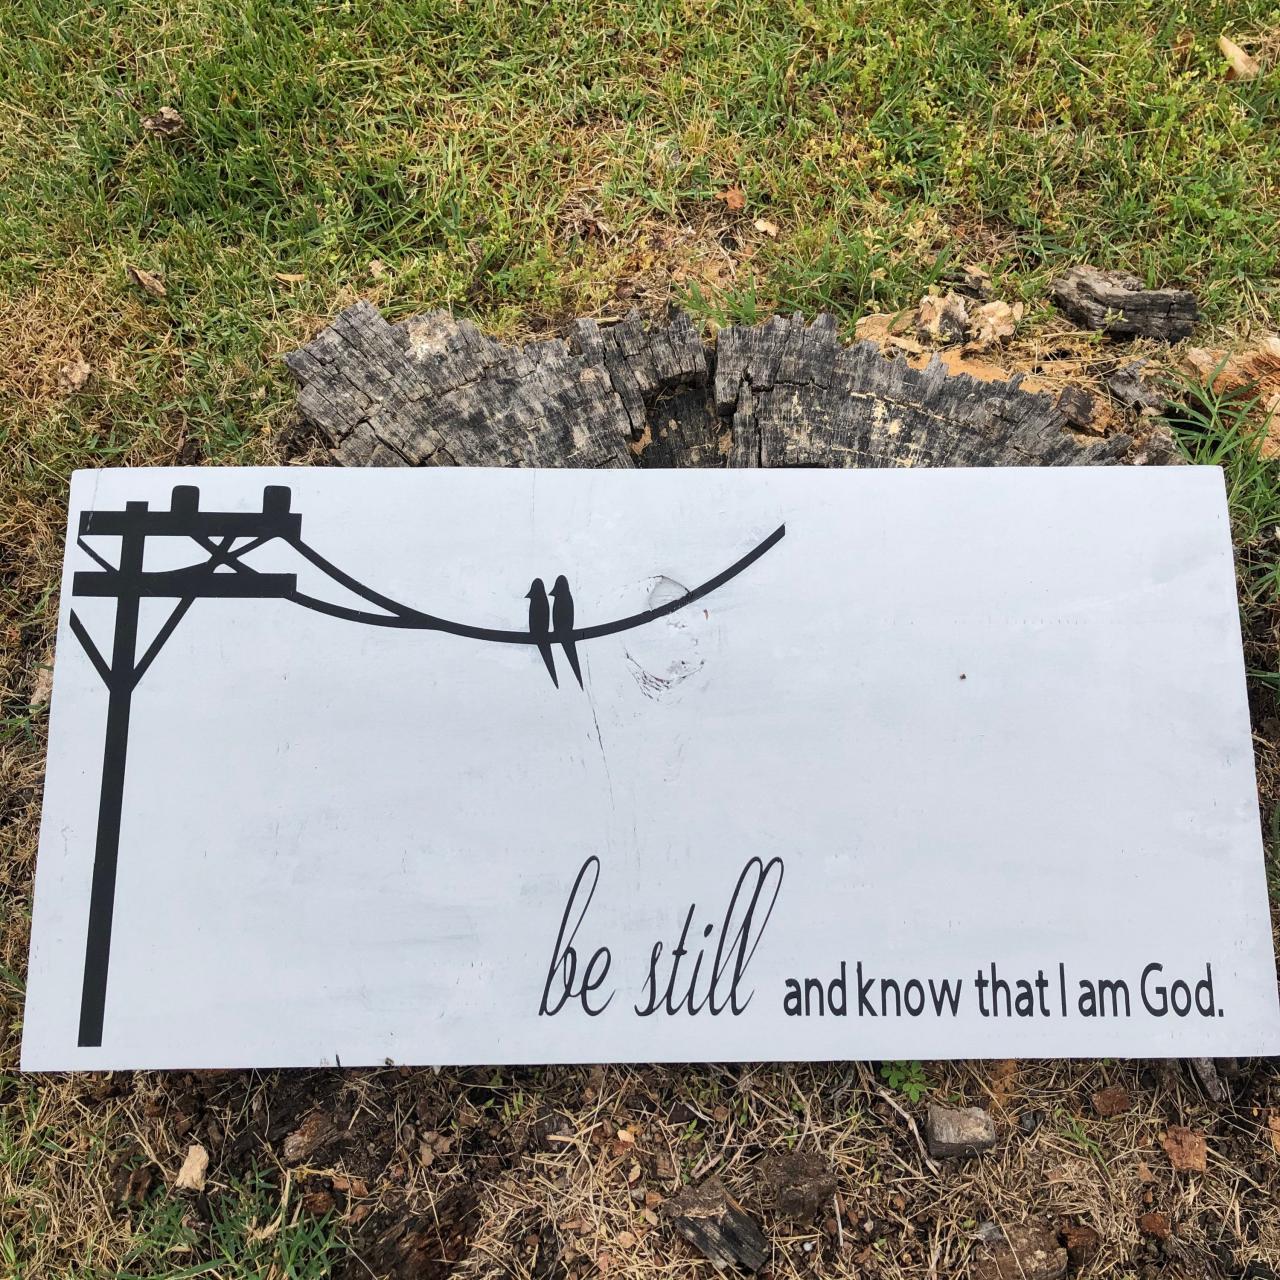 Be Still... Birds On A Wire 12x24 Hand Painted Wood Sign. Be Still And Know That I Am God. Hand Painted Wood Sign.